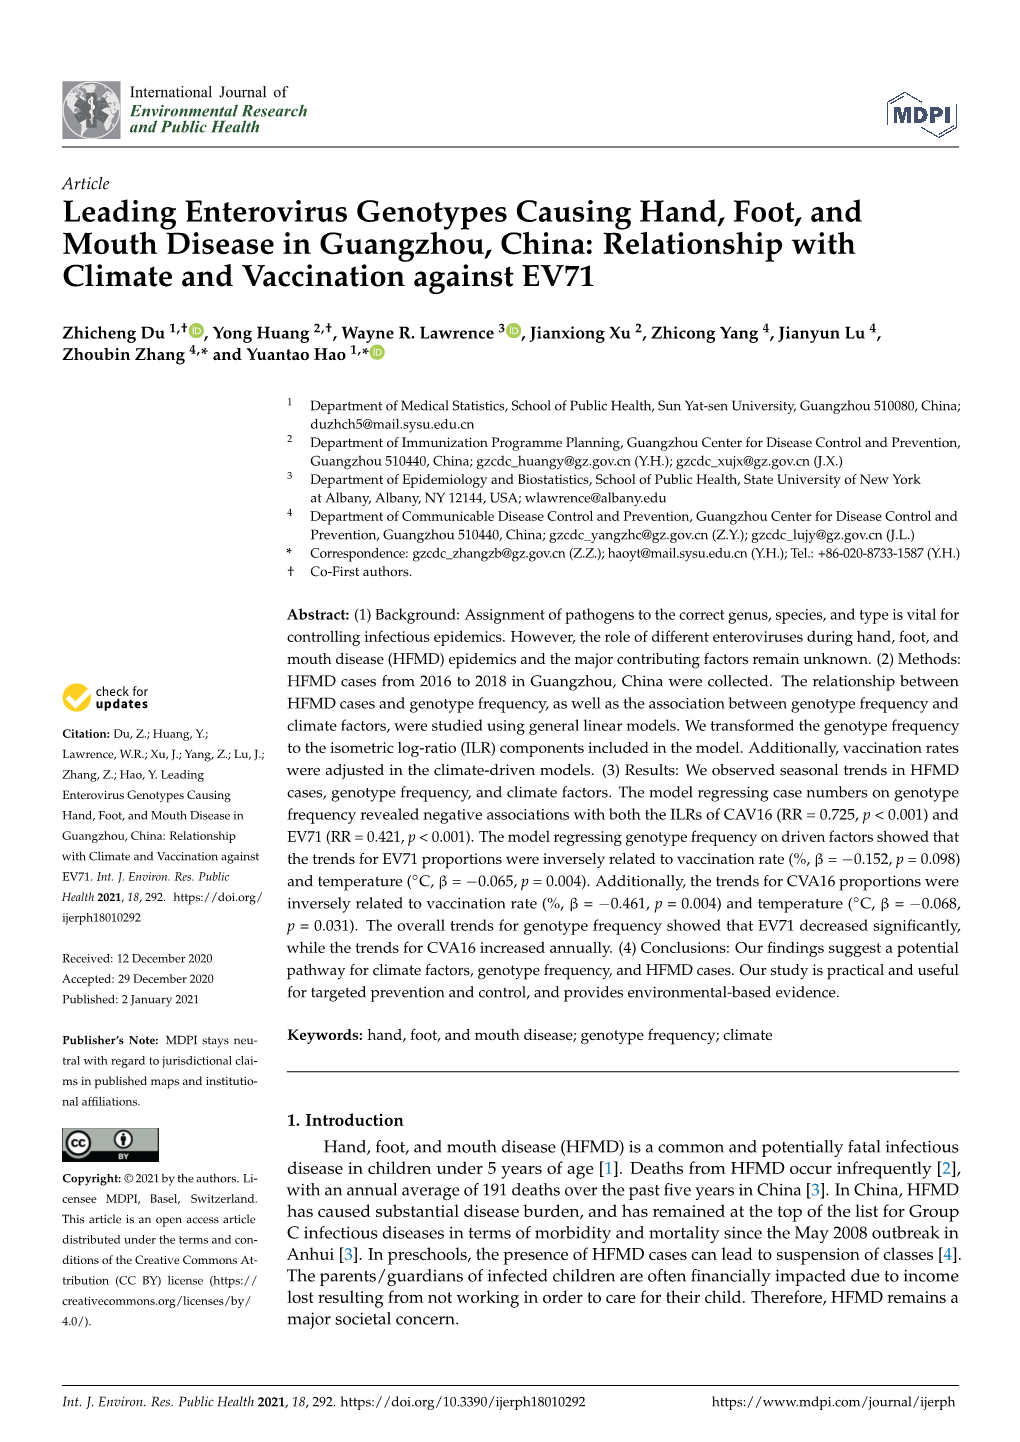 Leading Enterovirus Genotypes Causing Hand, Foot, and Mouth Disease in Guangzhou, China: Relationship with Climate and Vaccination Against EV71